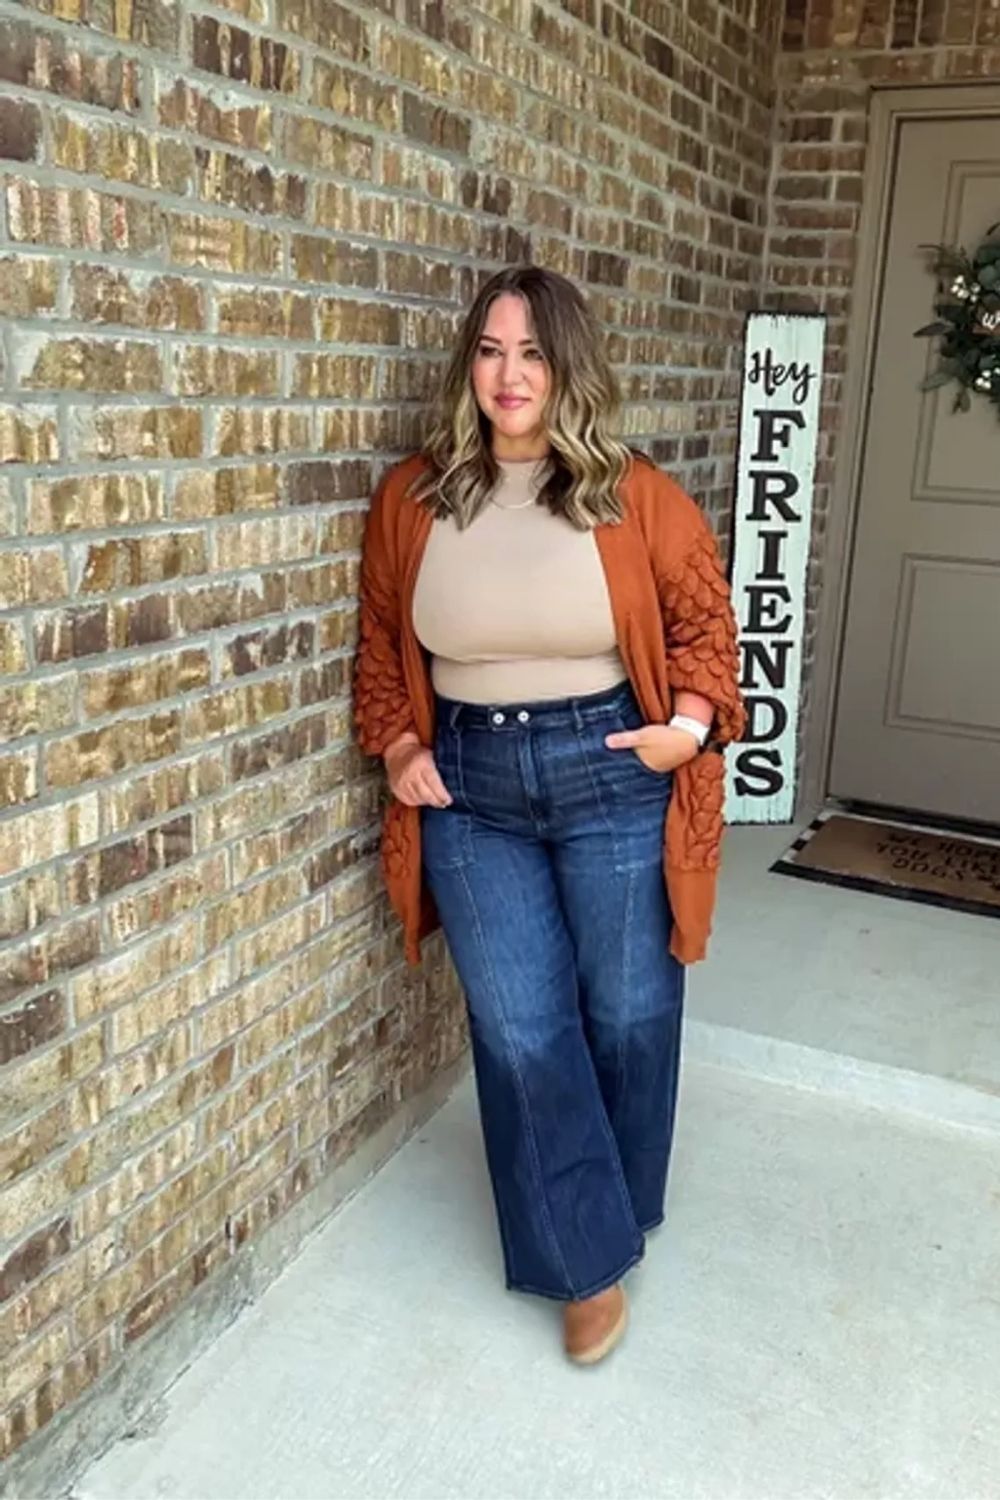 Featuring a balanced color palette with earthy tones, this ensemble pairs flared jeans and a fitted top, highlighting the silhouette, while a chunky cardigan adds a cozy, textured layer that is both stylish and practical.